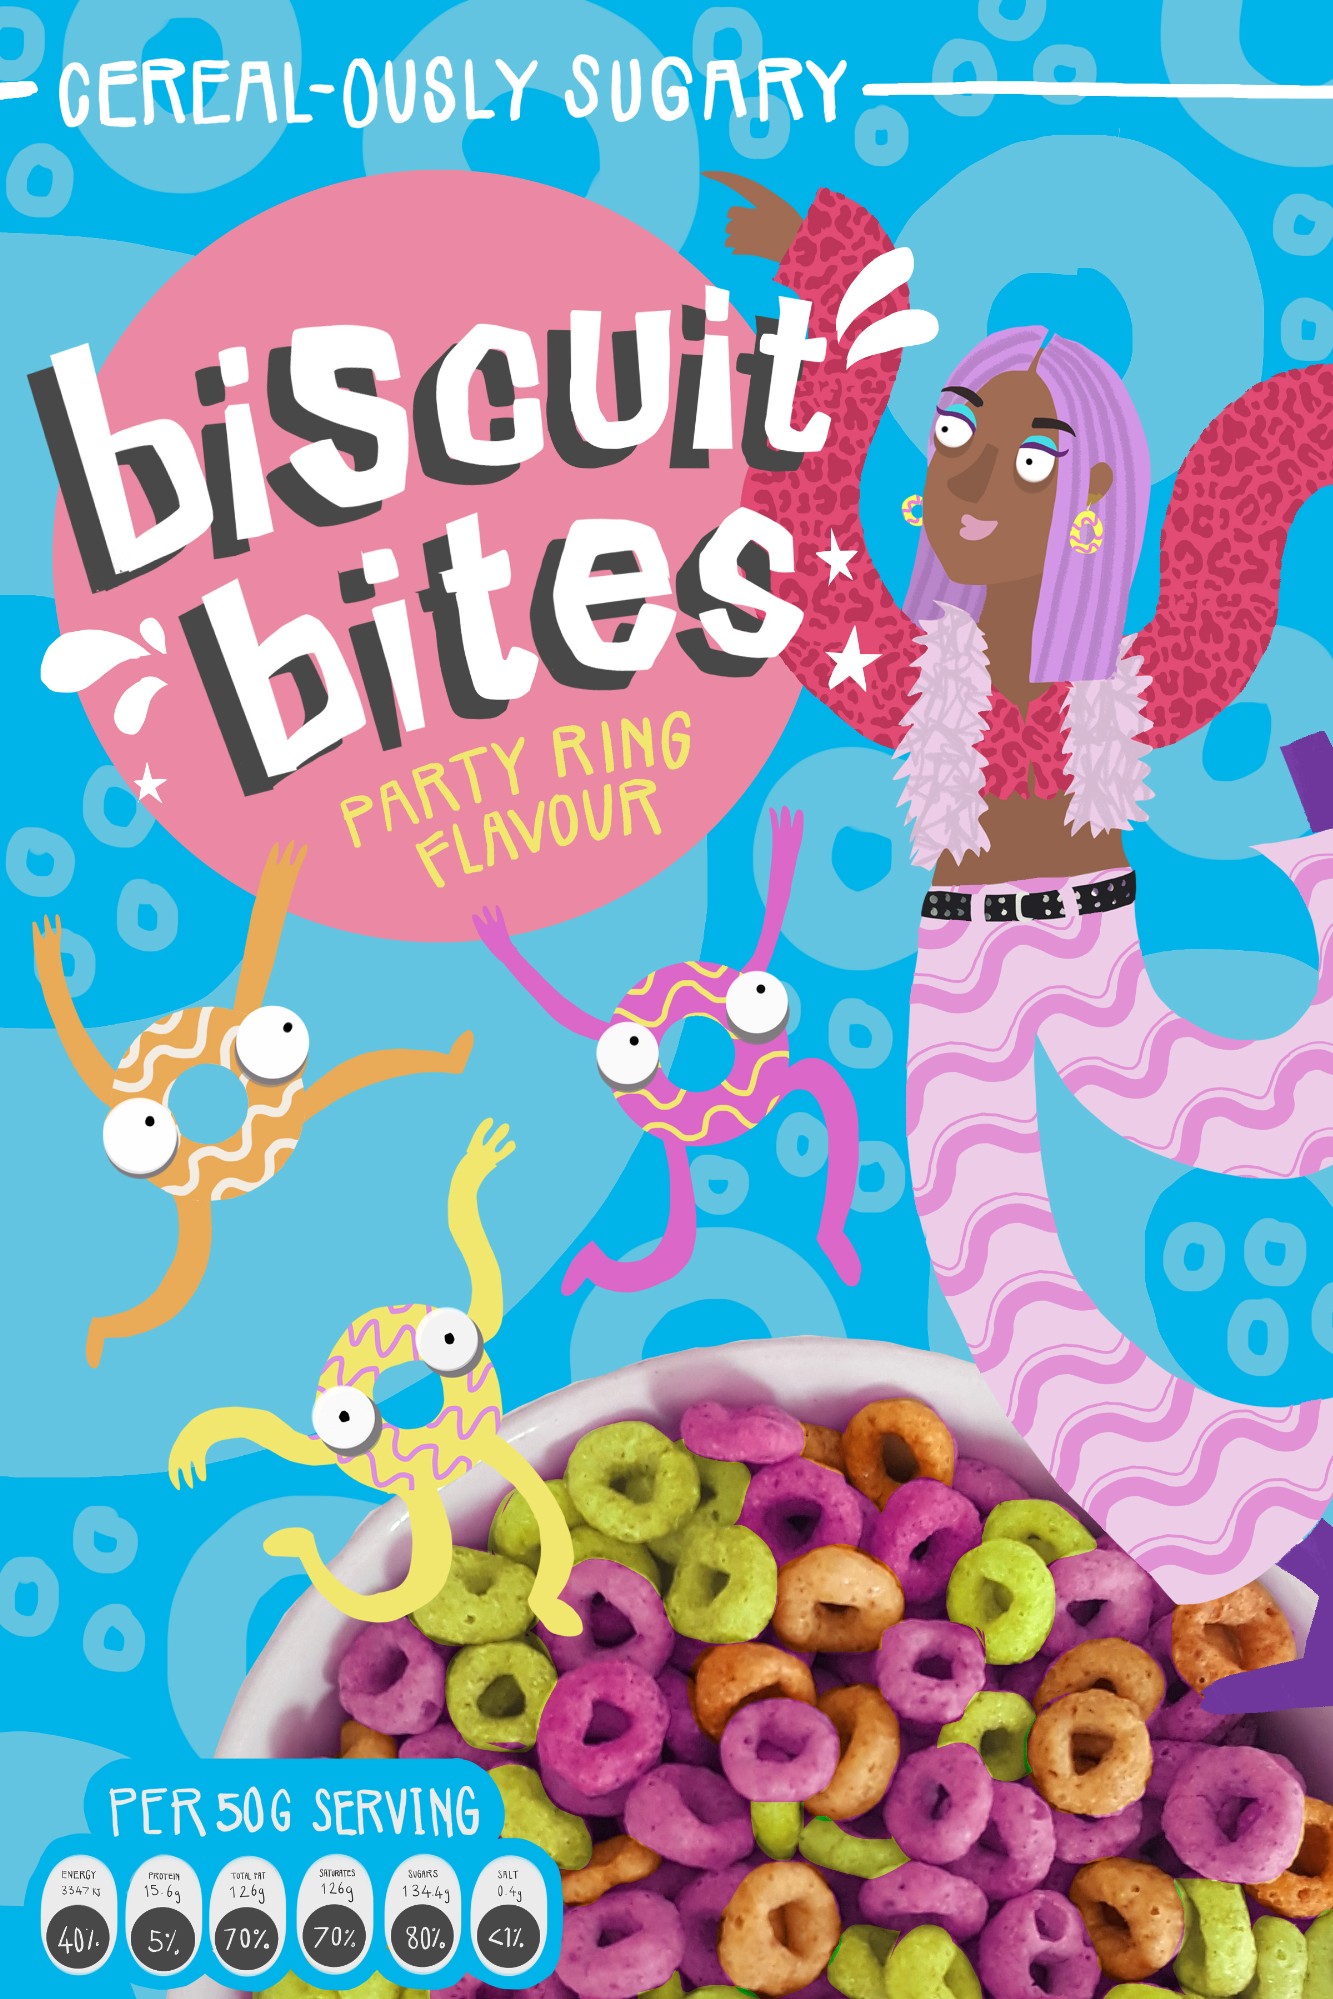 A cereal box cover for a fictional cereal line “Biscuit Bites”, based on nostalgic biscuits that I loved growing up.